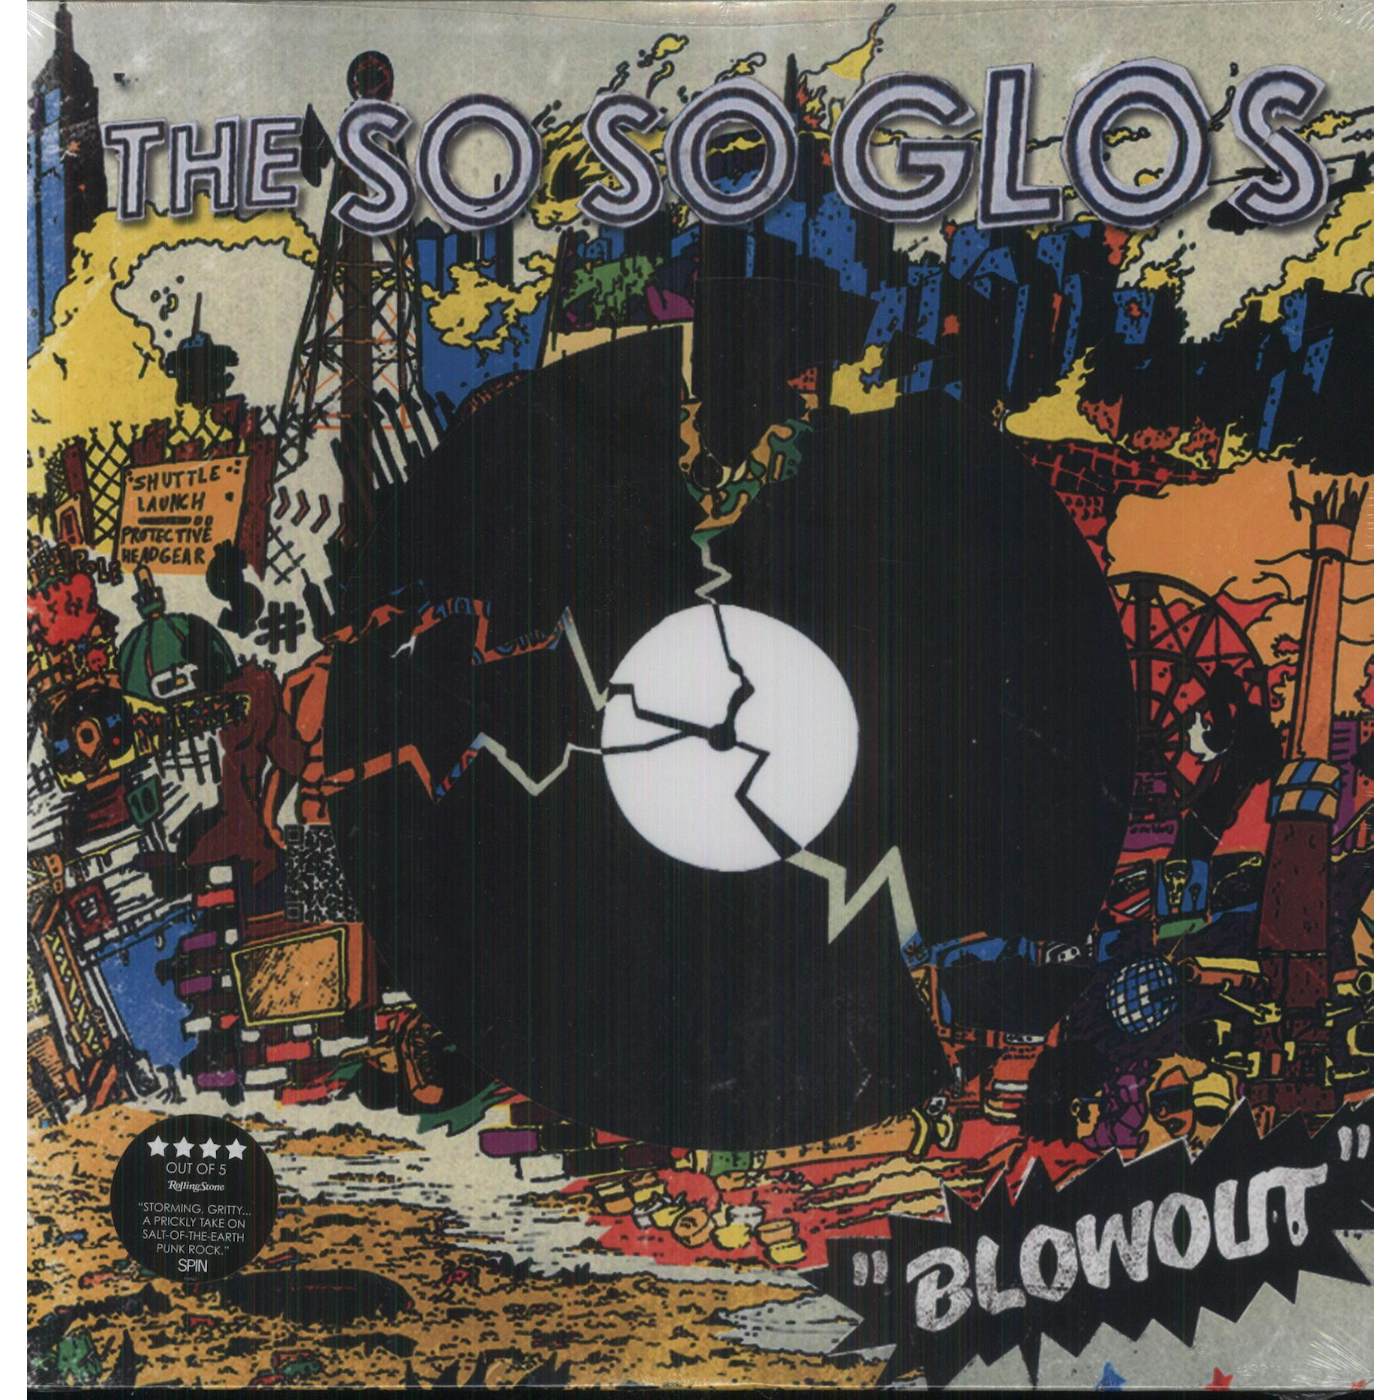 The So So Glos Blowout Vinyl Record